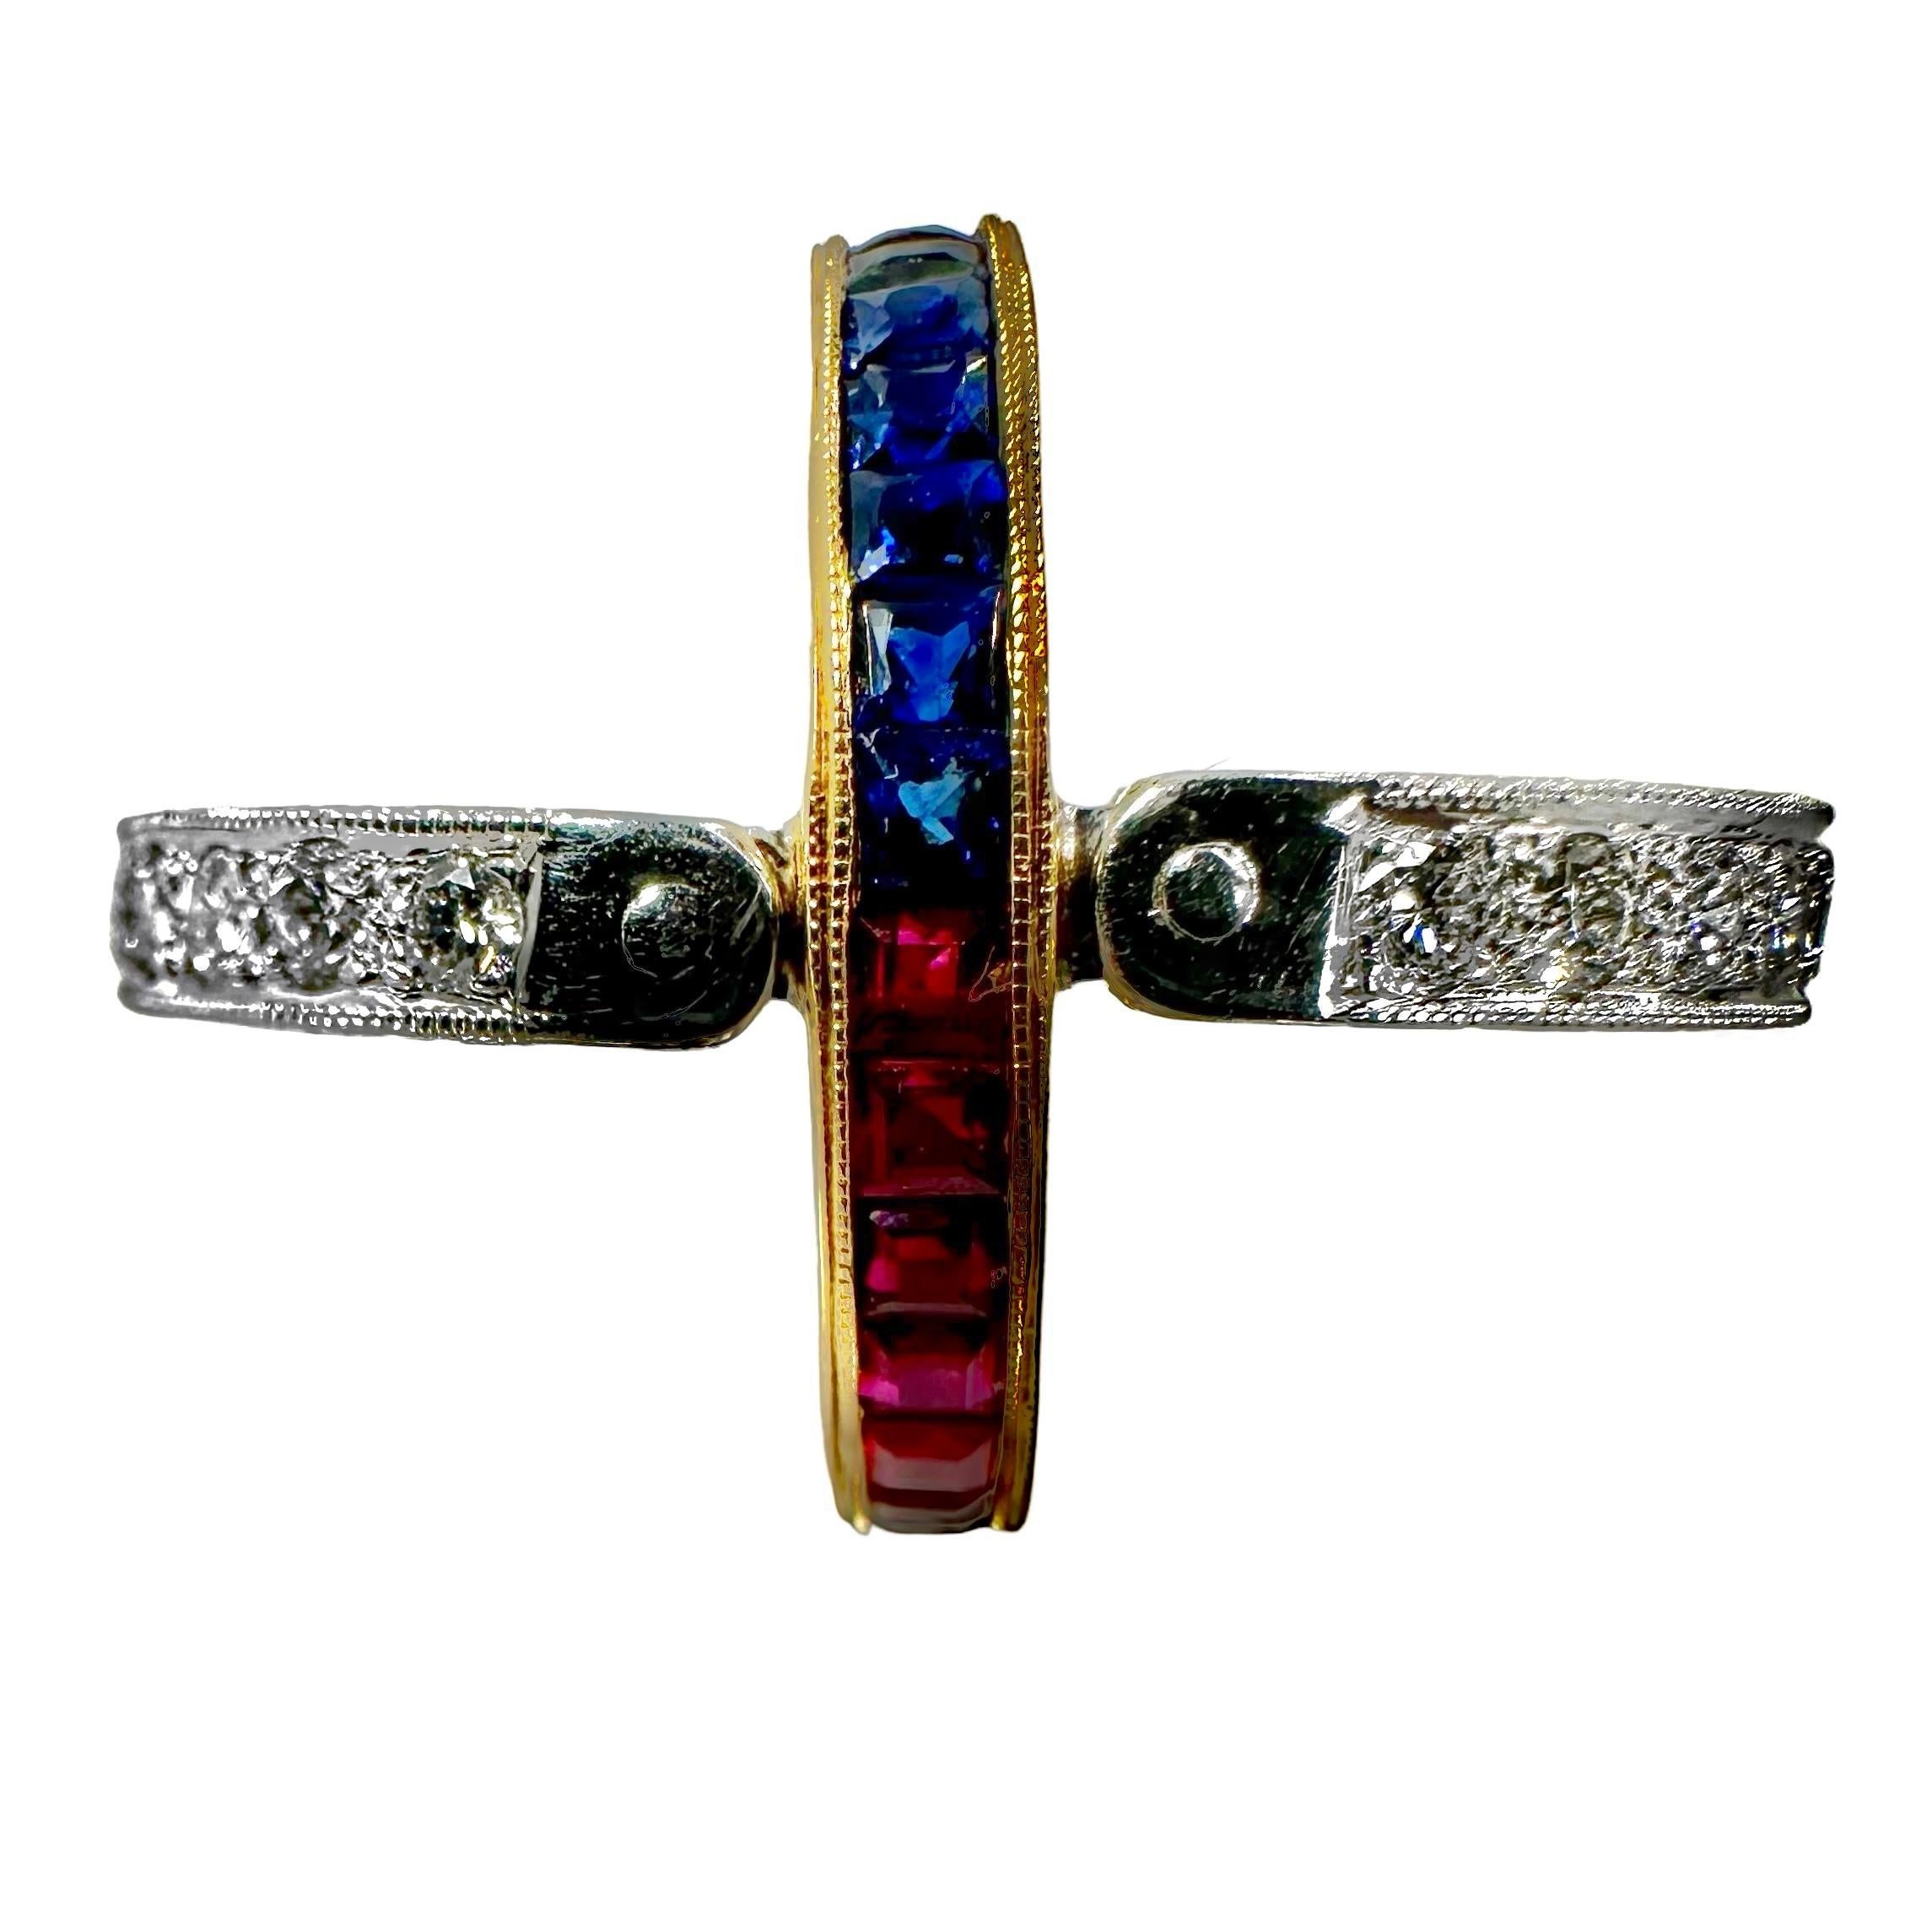 Women's Reversible 3 Row Wide Band Style Ring with Rubies, Diamonds and Sapphires For Sale